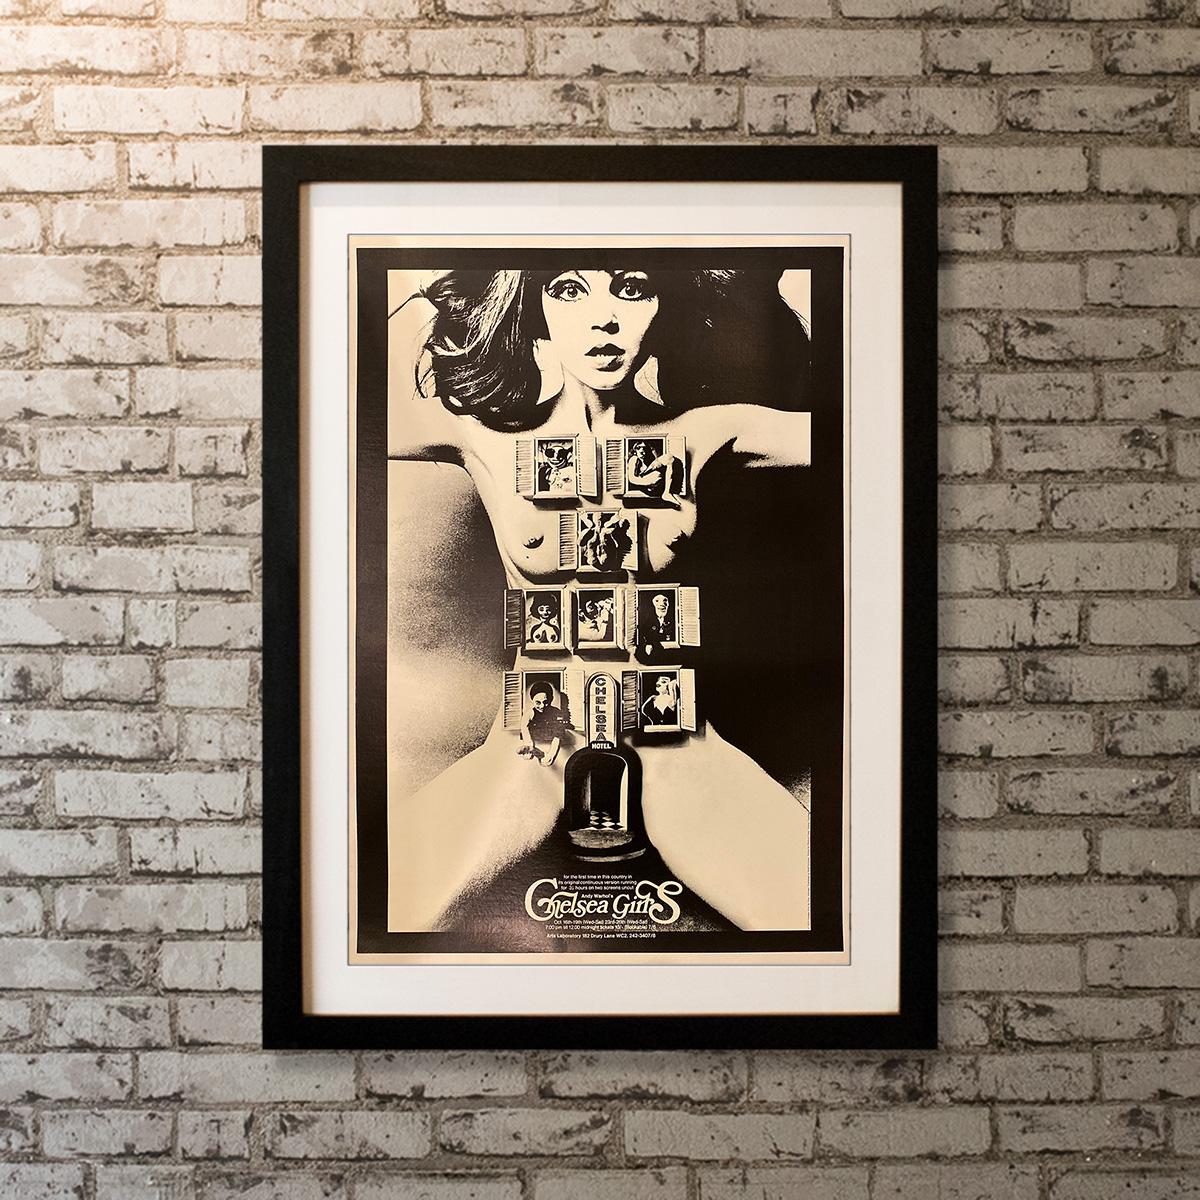 Original British double-crown, part art artefact and part movie poster. Alan Aldridge's iconic design for Andy Warhol's Chelsea girls is possibly the most sought after art movie poster image of the late 1960s, as it combines Warhol with swinging